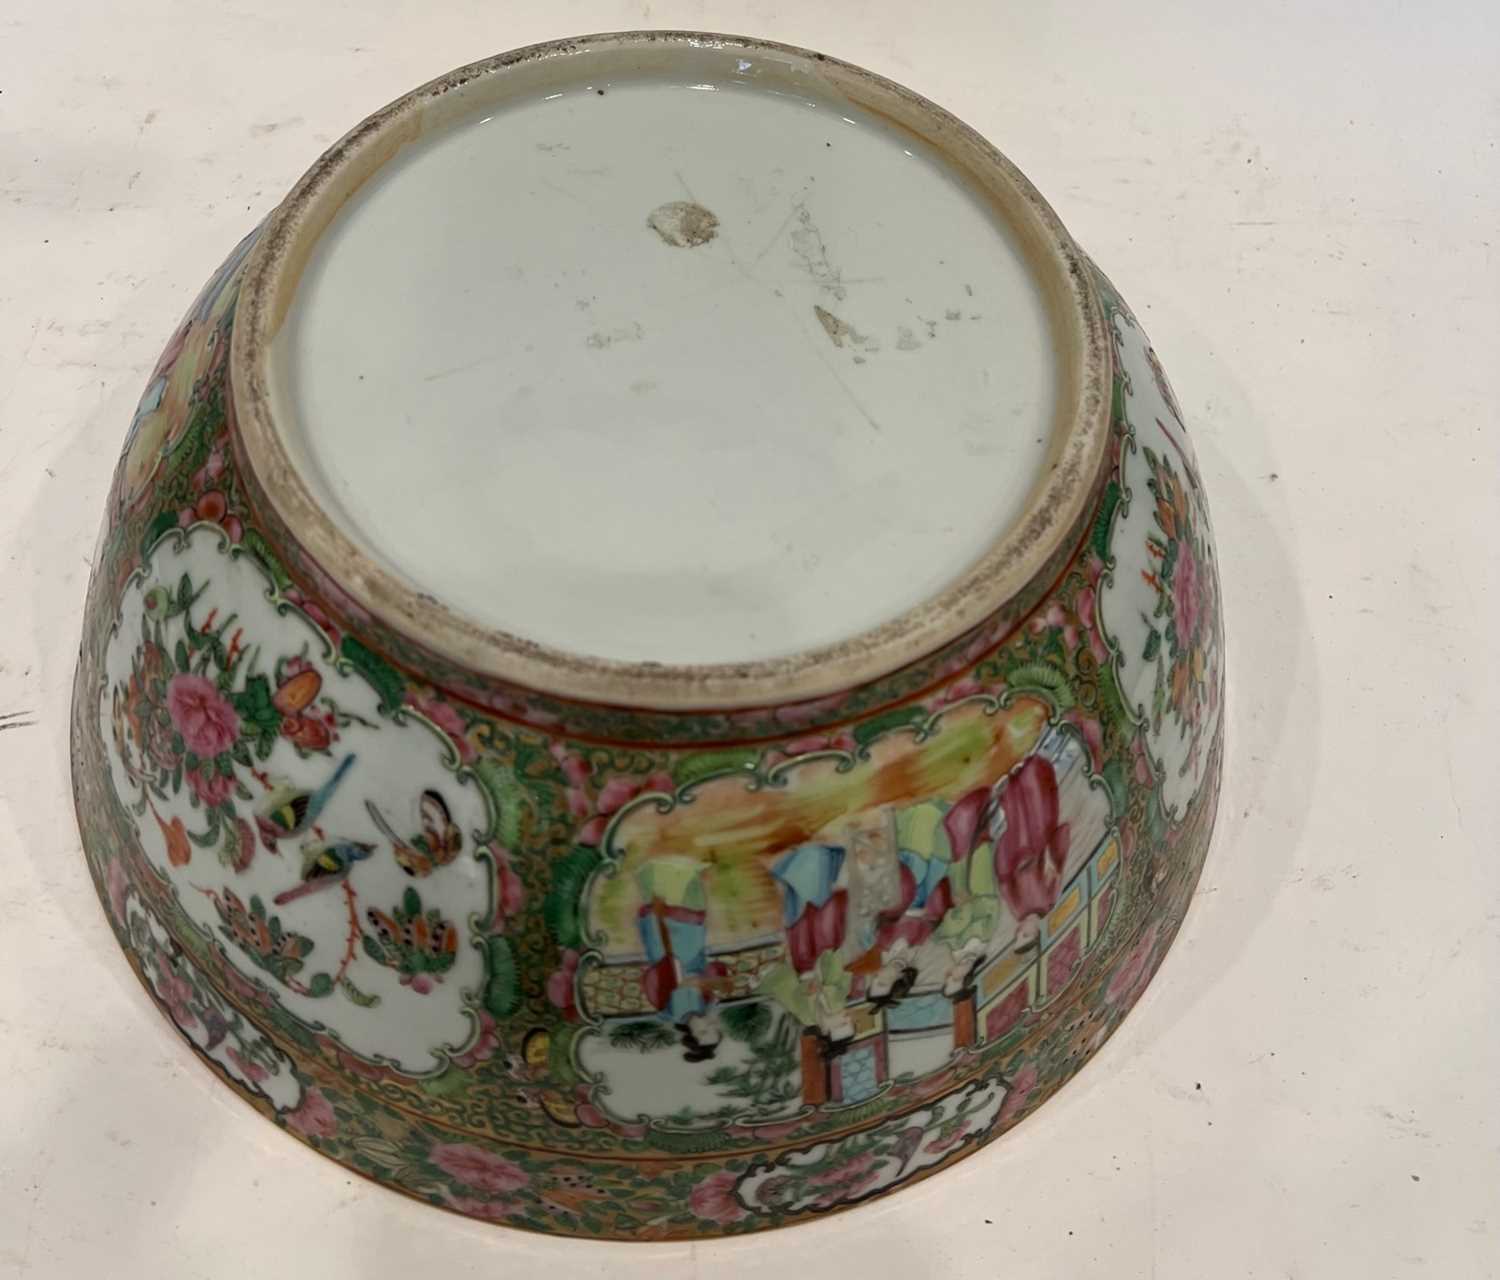 A LARGE LATE 19TH CENTURY CHINESE CANTON PORCELAIN BOWL - Image 3 of 7